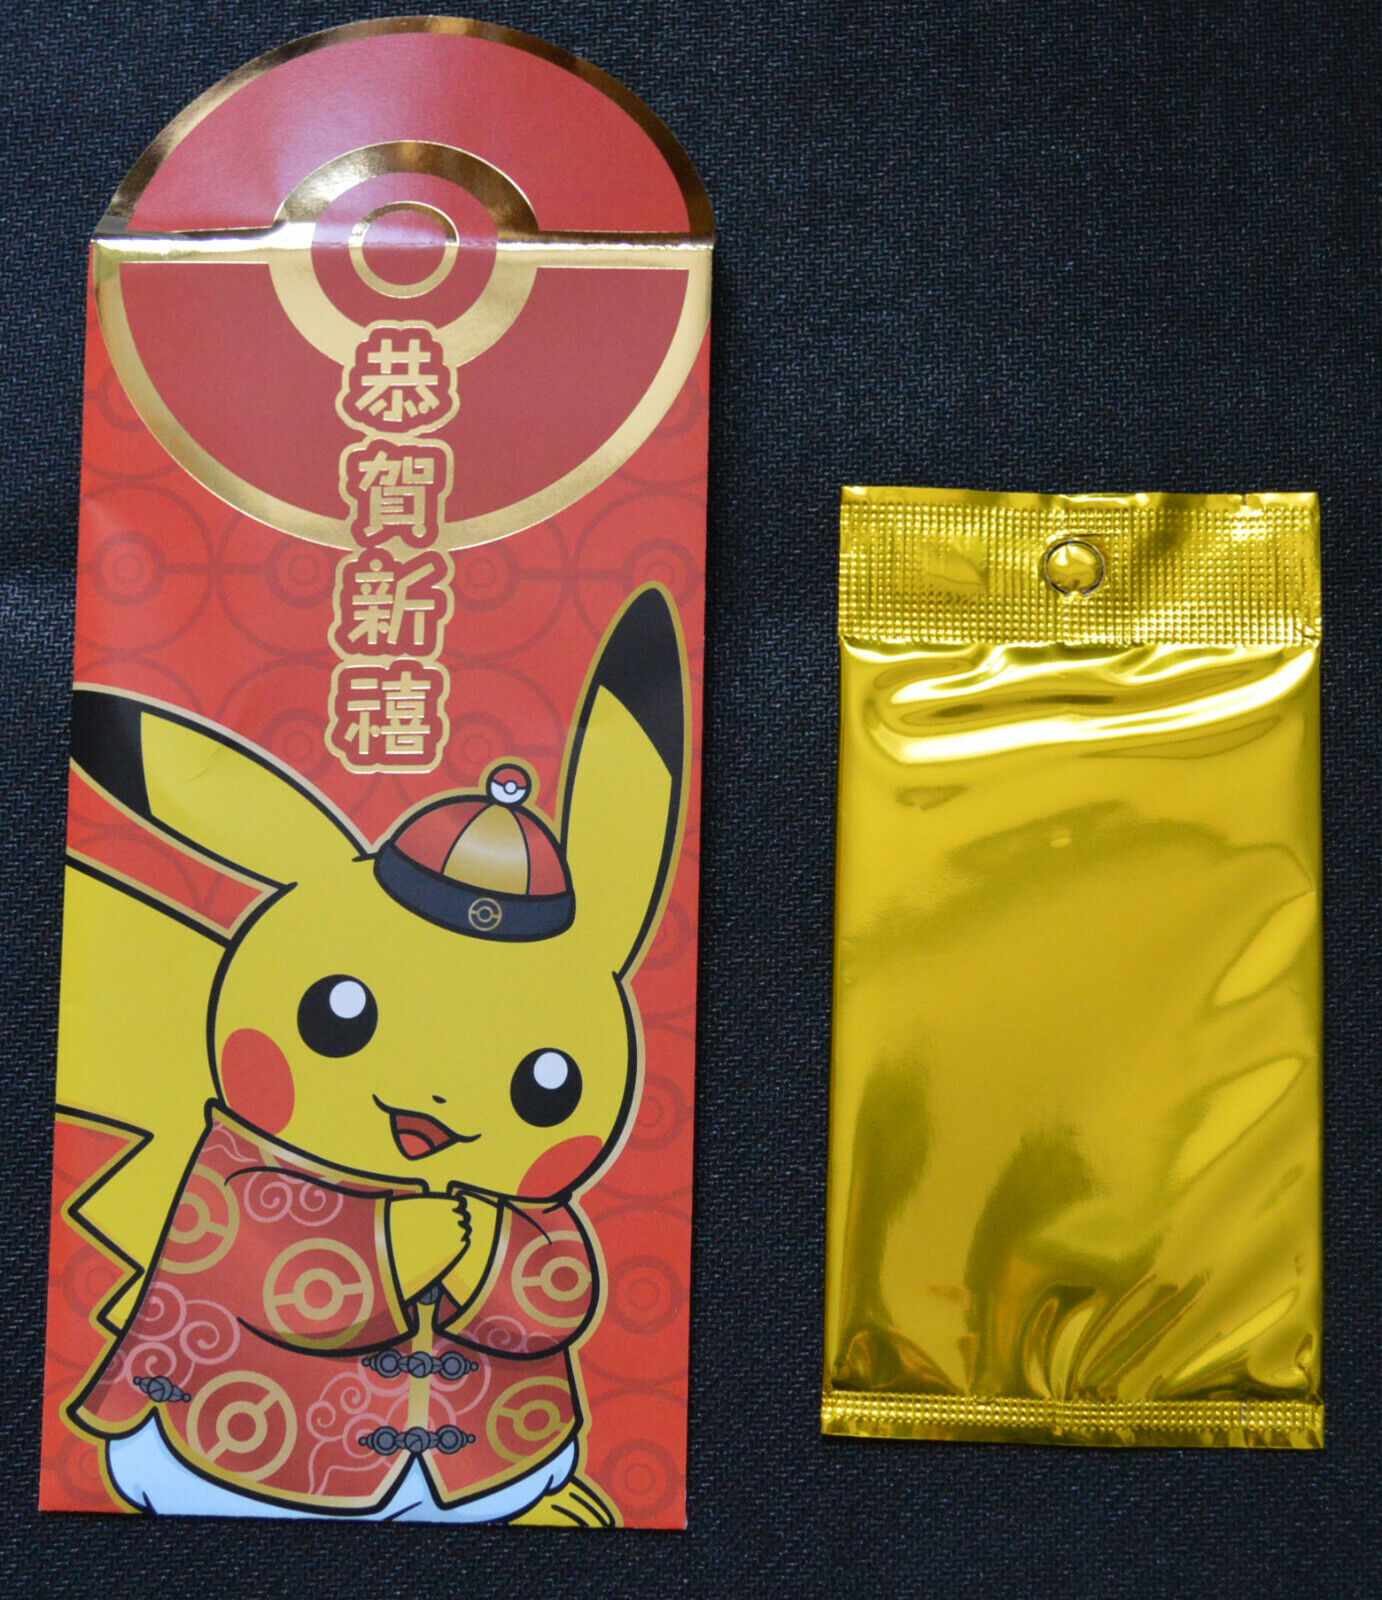 Pokemon CHINESE LUNAR NEW YEAR 2021 Red Packet Envelope Pikachu with Promo card